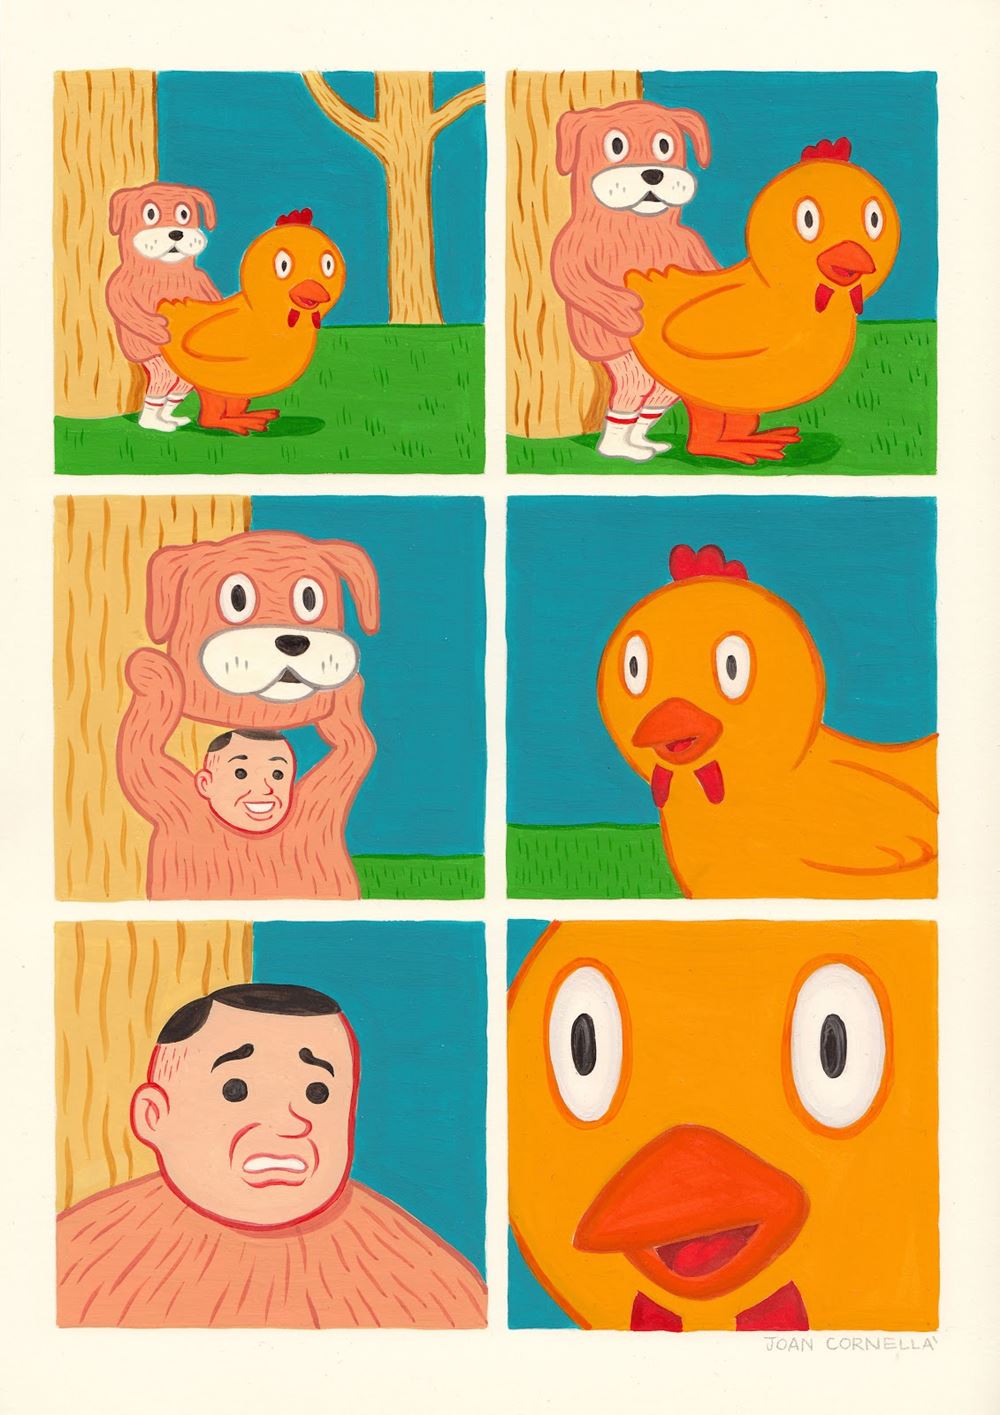 http://www.funnyjunk.com/10+joan+cornella+comics+explained/funny-pictures/5337117/